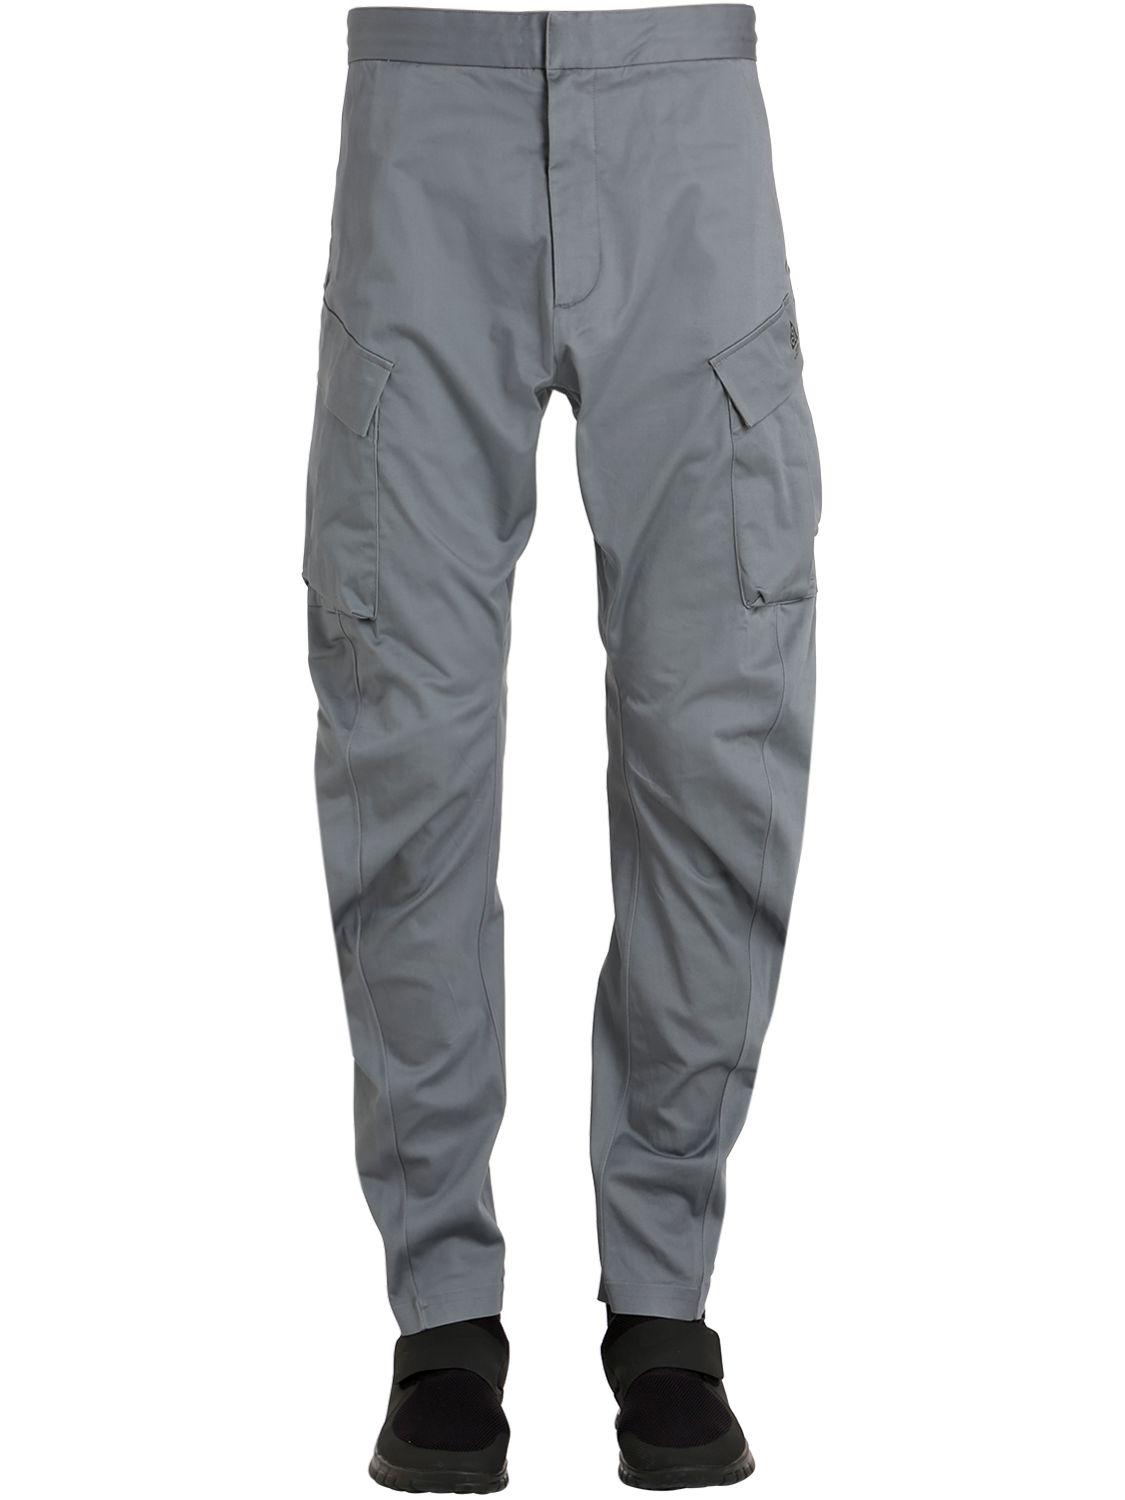 Nike CLUB CARGO WOVEN PANT Grey  BSTN Store